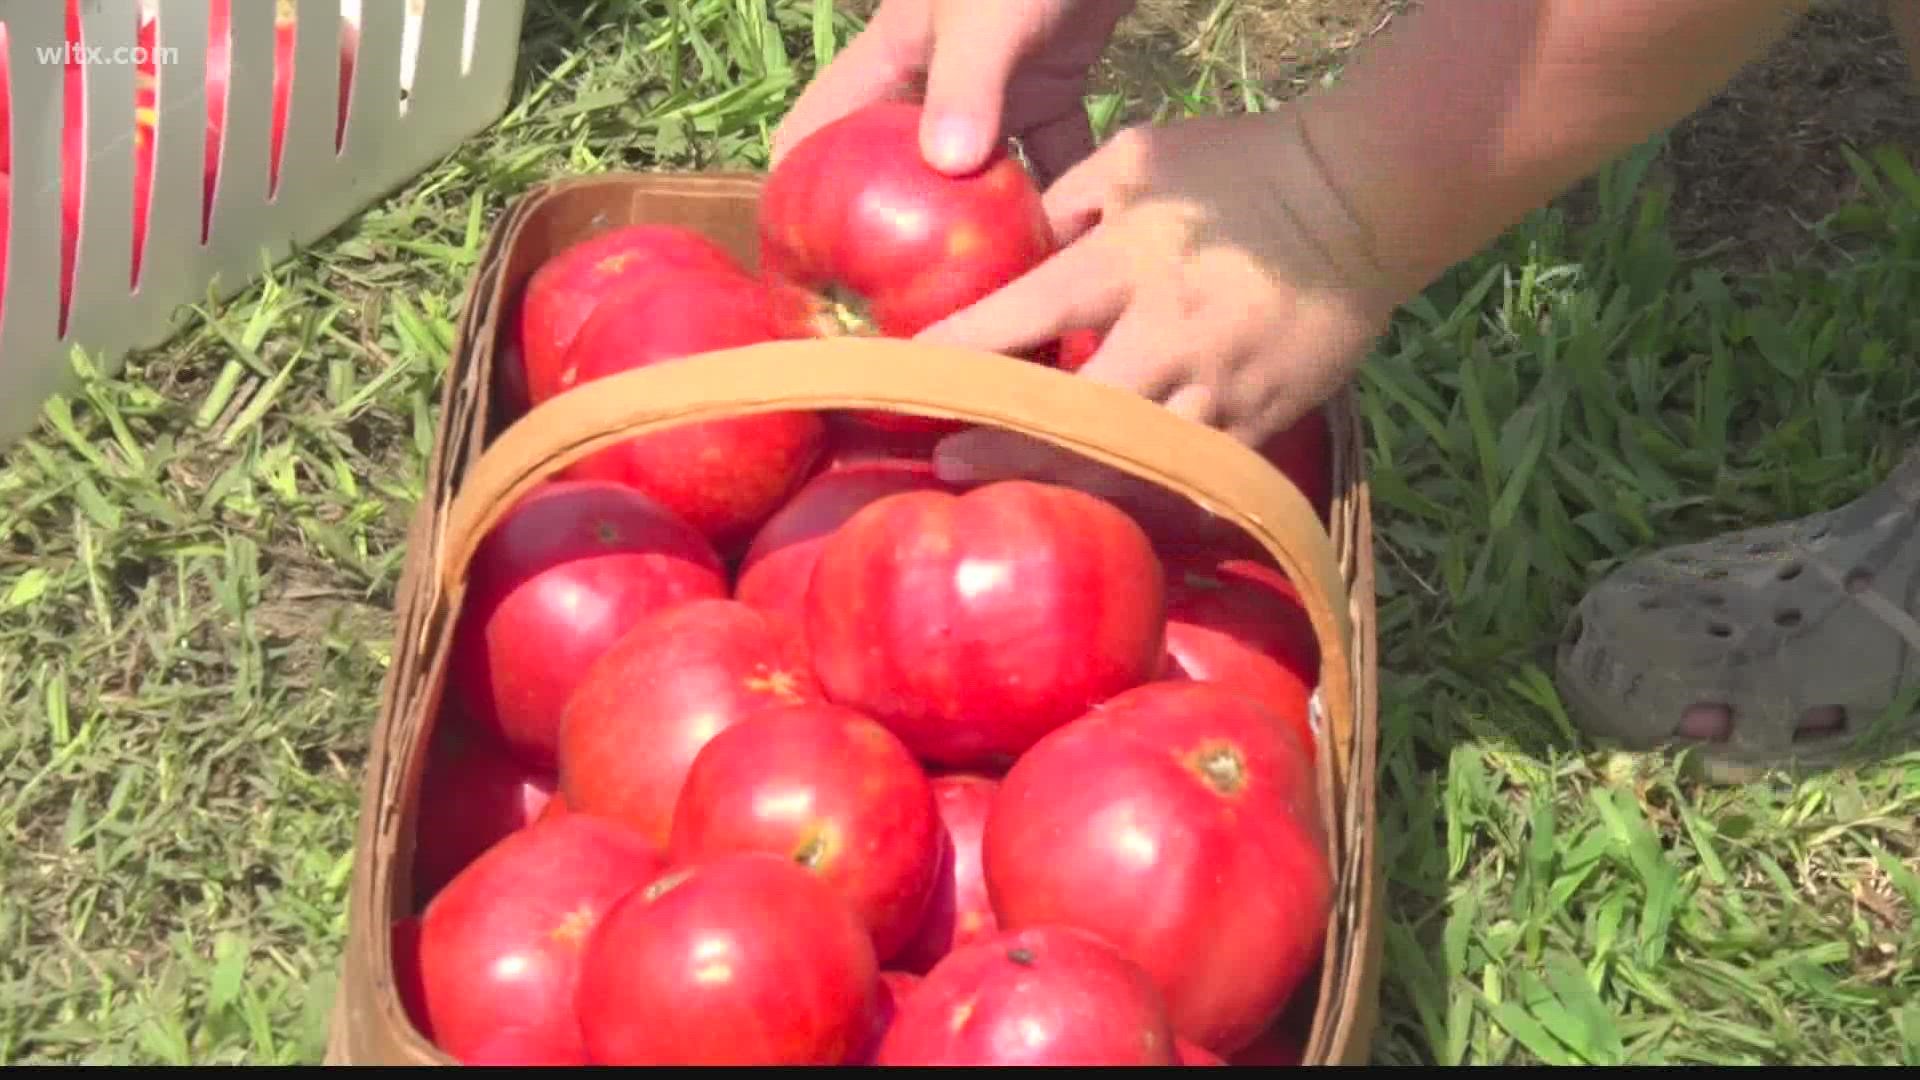 Look for the Newberry County 4-H Club showing off fresh-grown produce at the Grow Newberry Farmers Market Saturday.